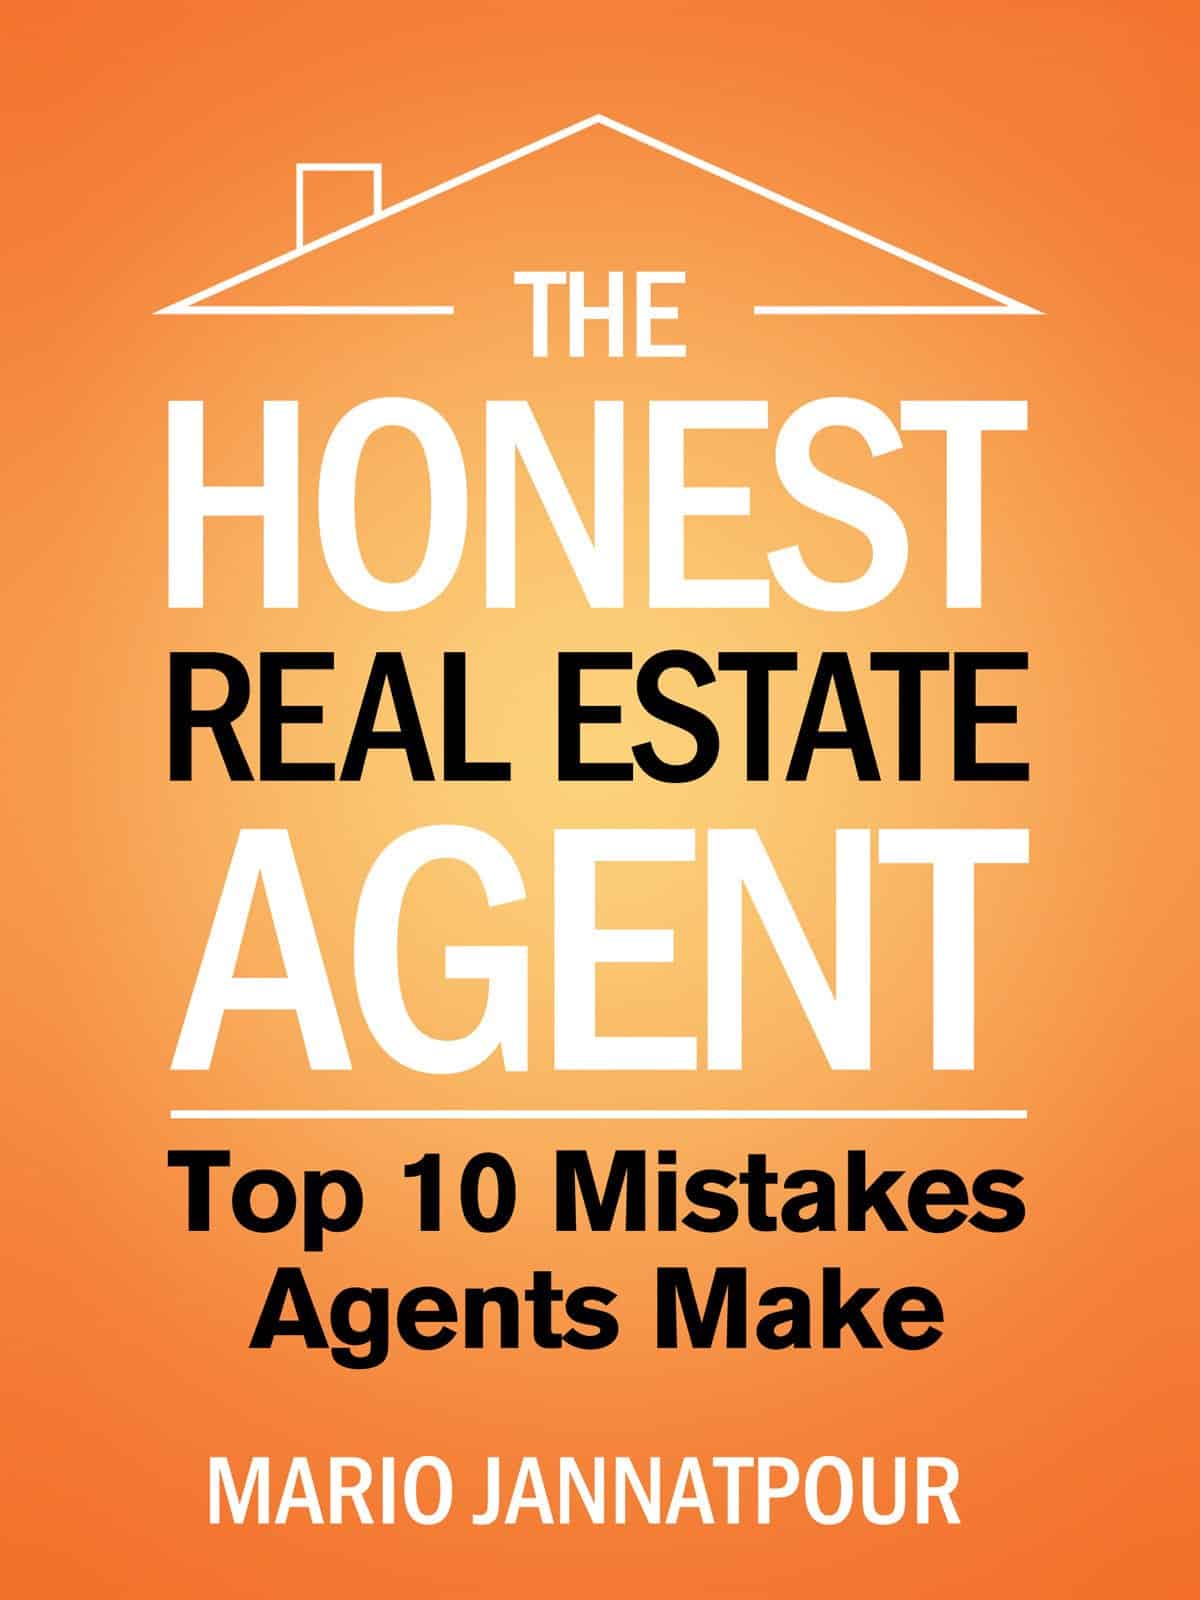 The Honest Real Estate Agent written by Mario Jannatpour book cover